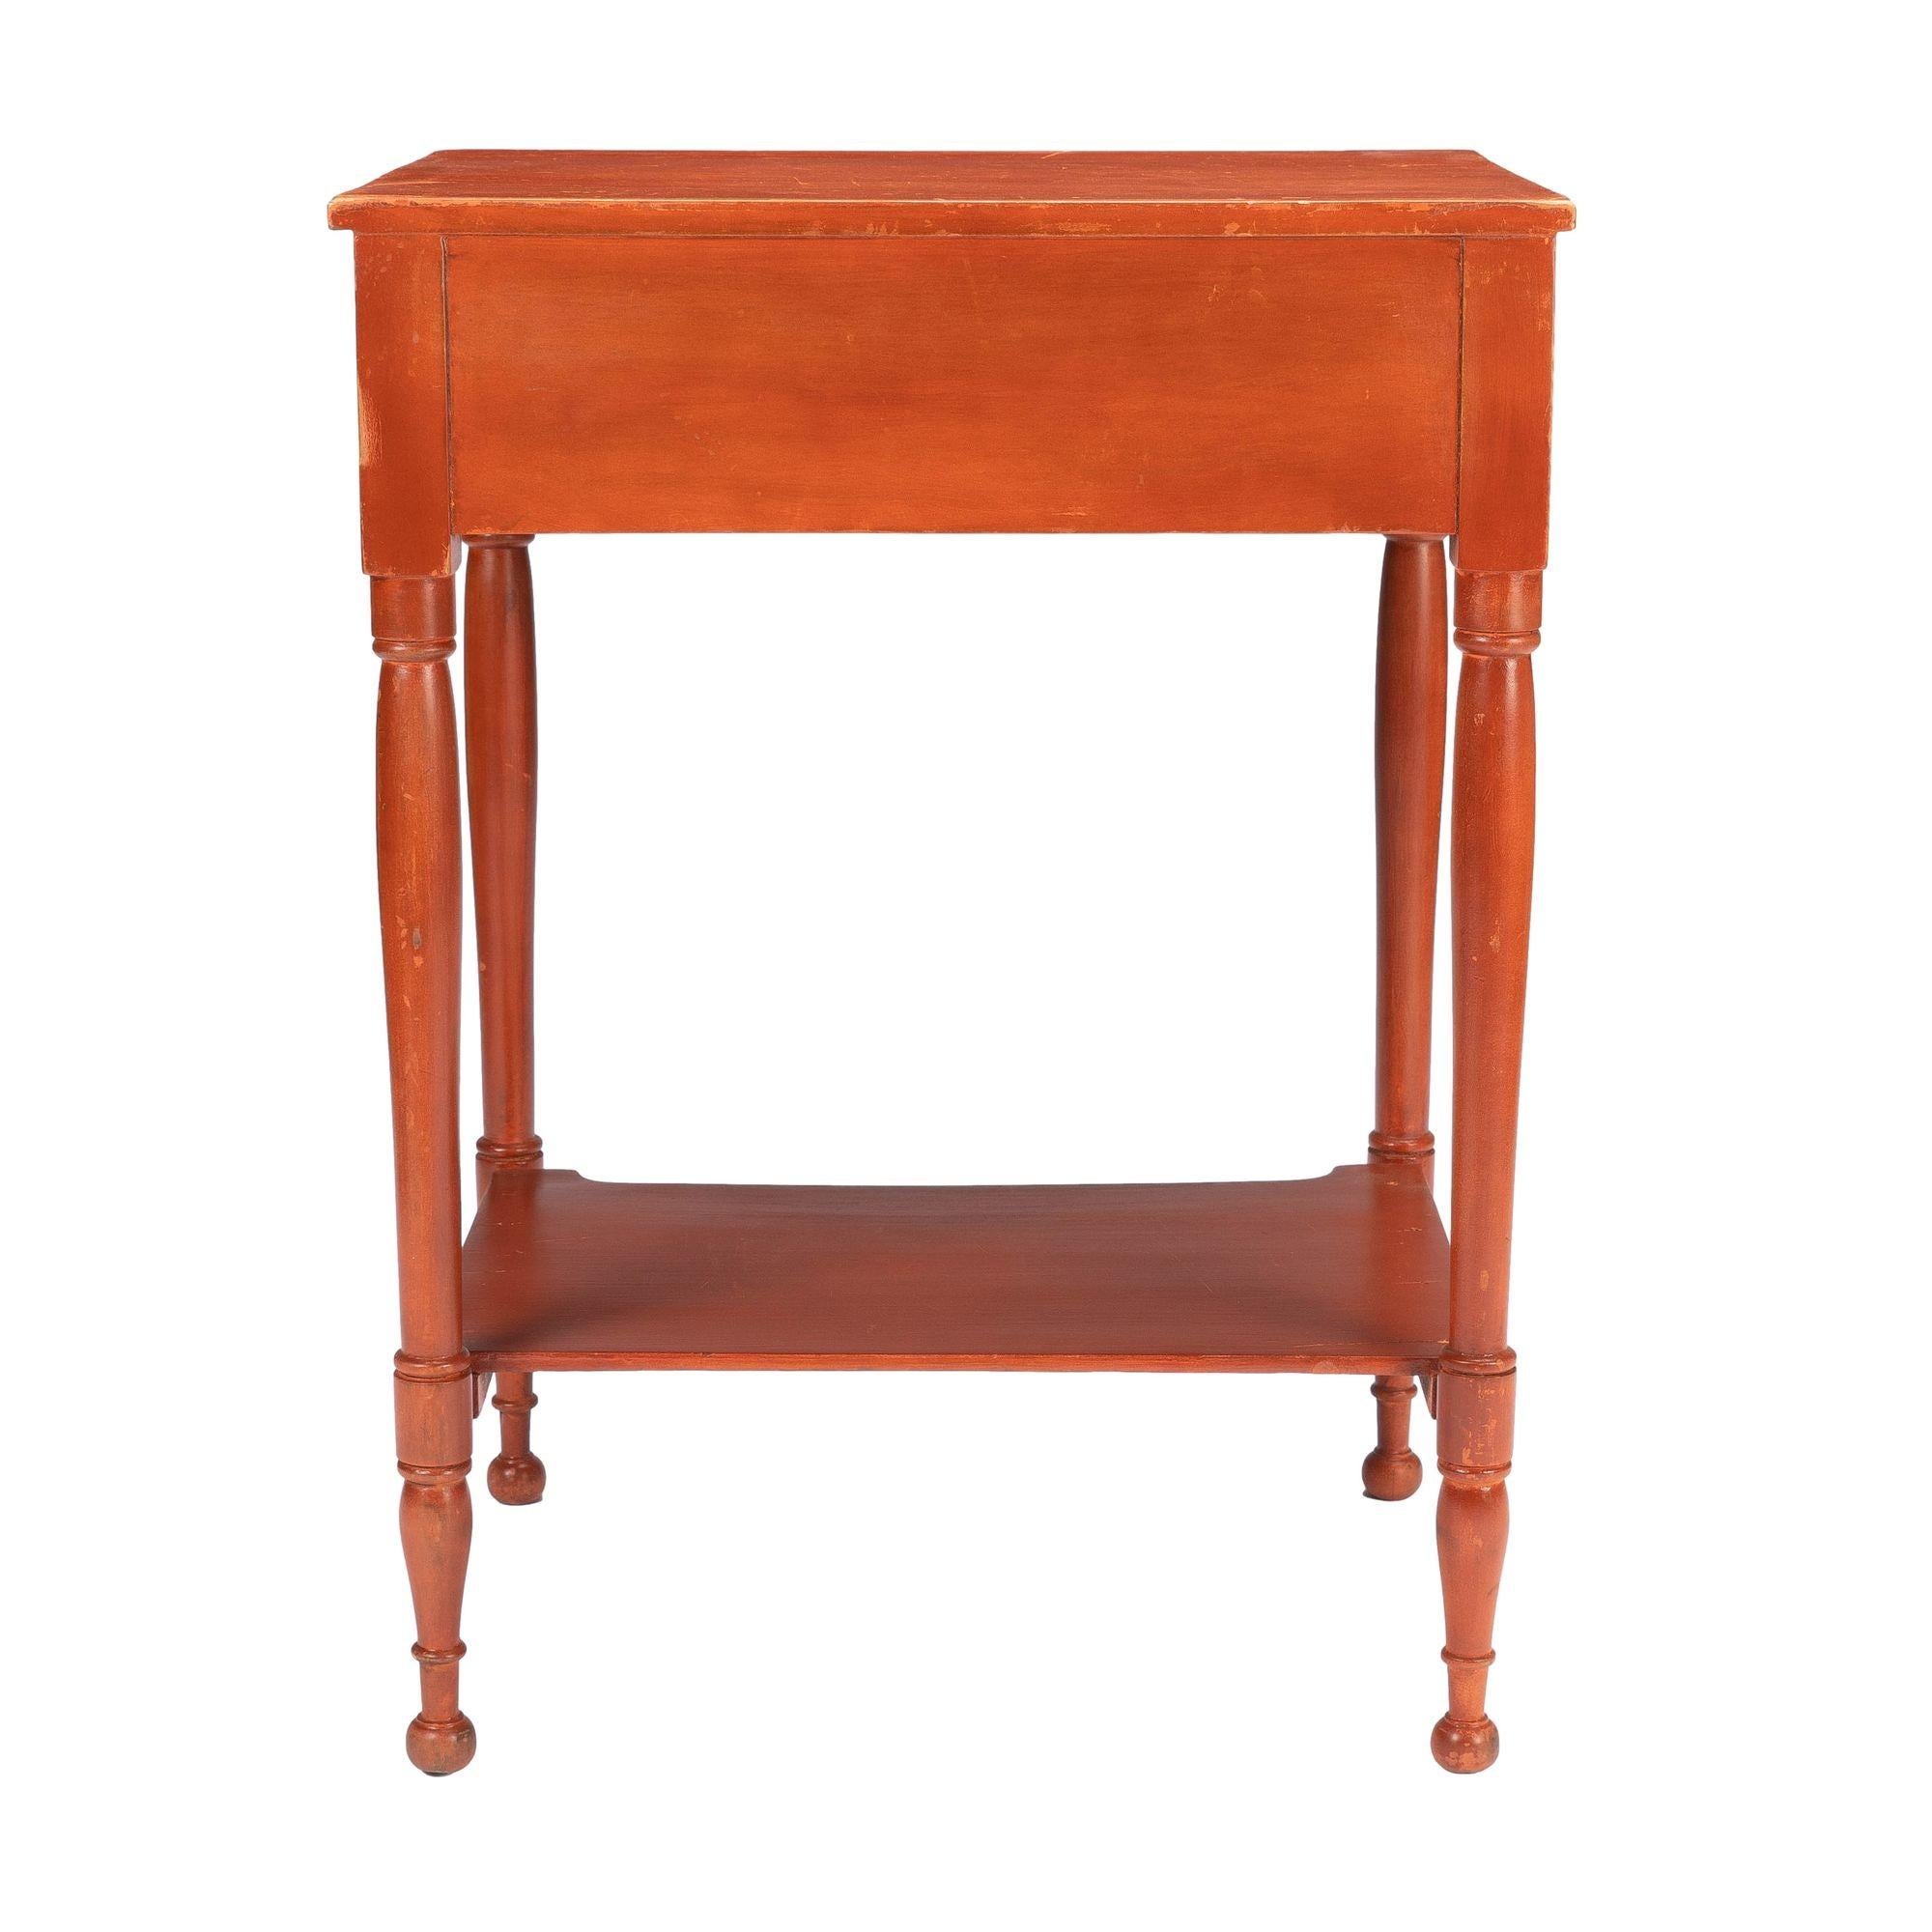 19th Century Pennsylvania Sheraton Oxide Stained One Drawer Stand with Stretcher Shelf '1820' For Sale